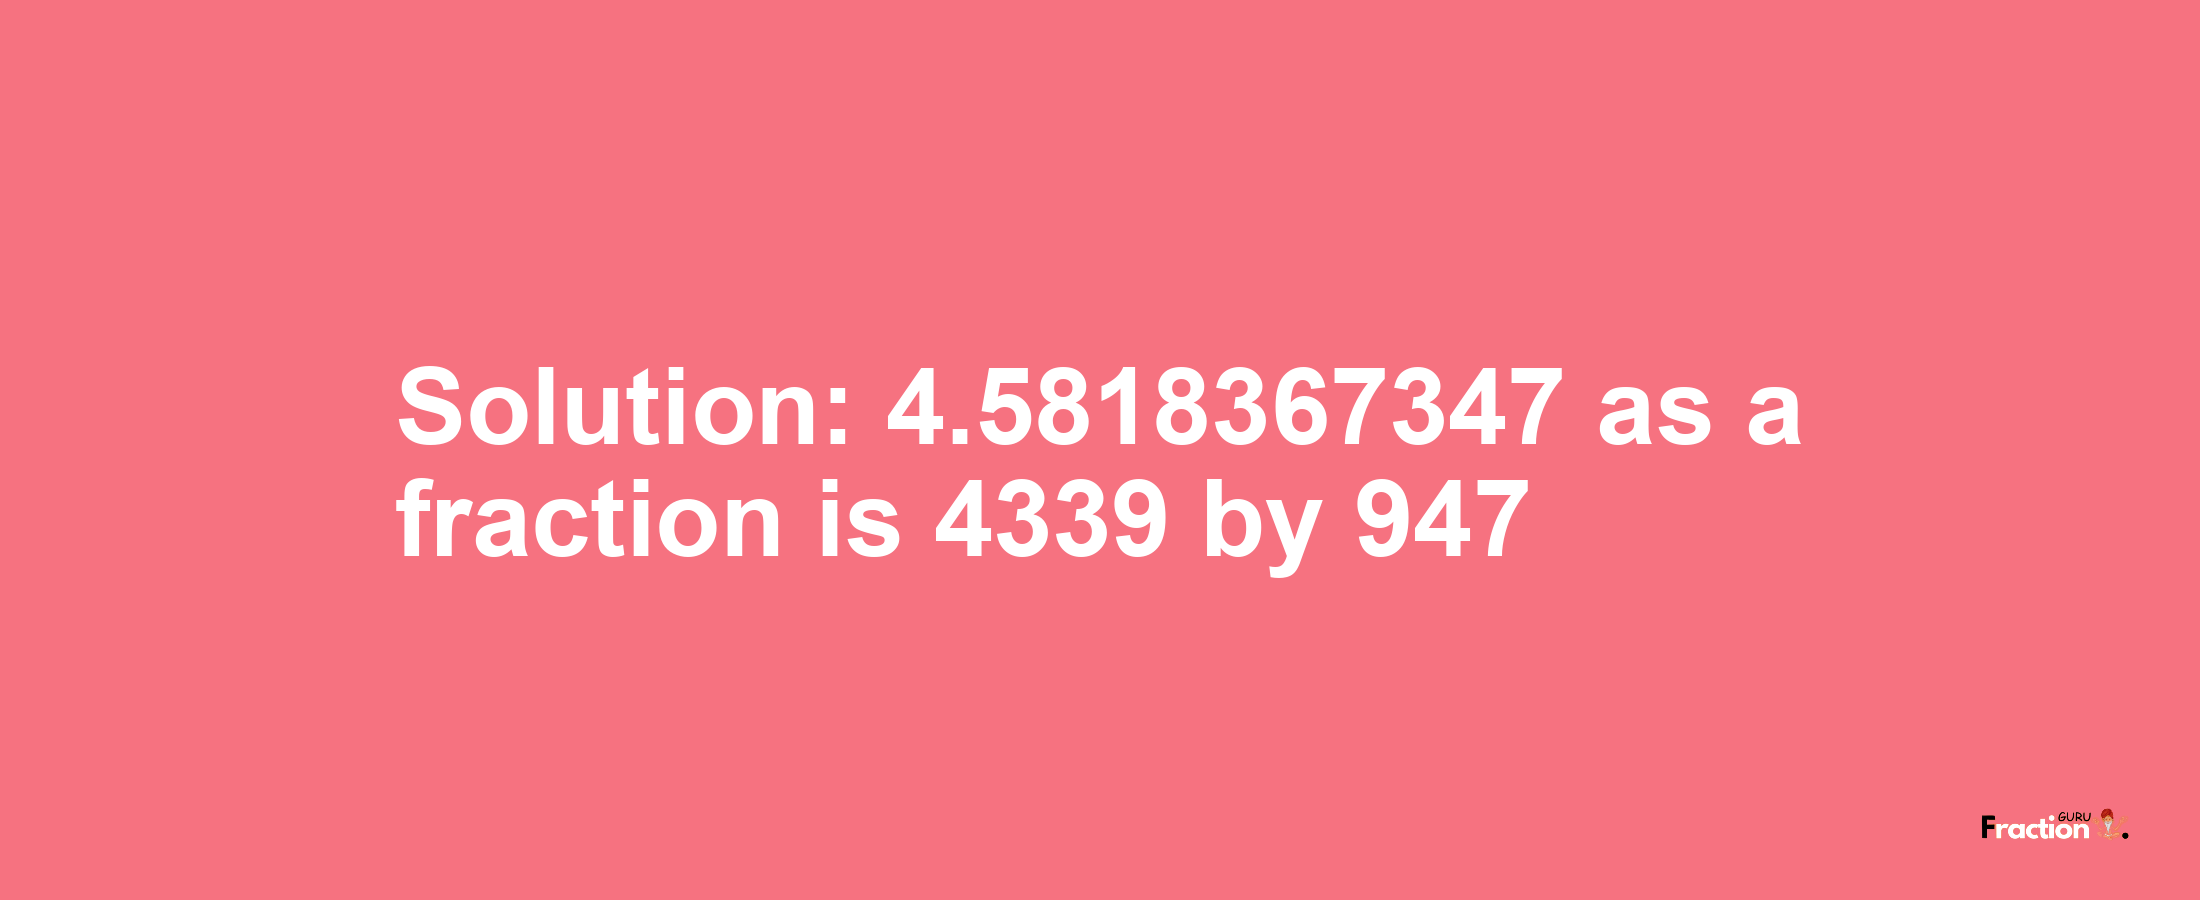 Solution:4.5818367347 as a fraction is 4339/947